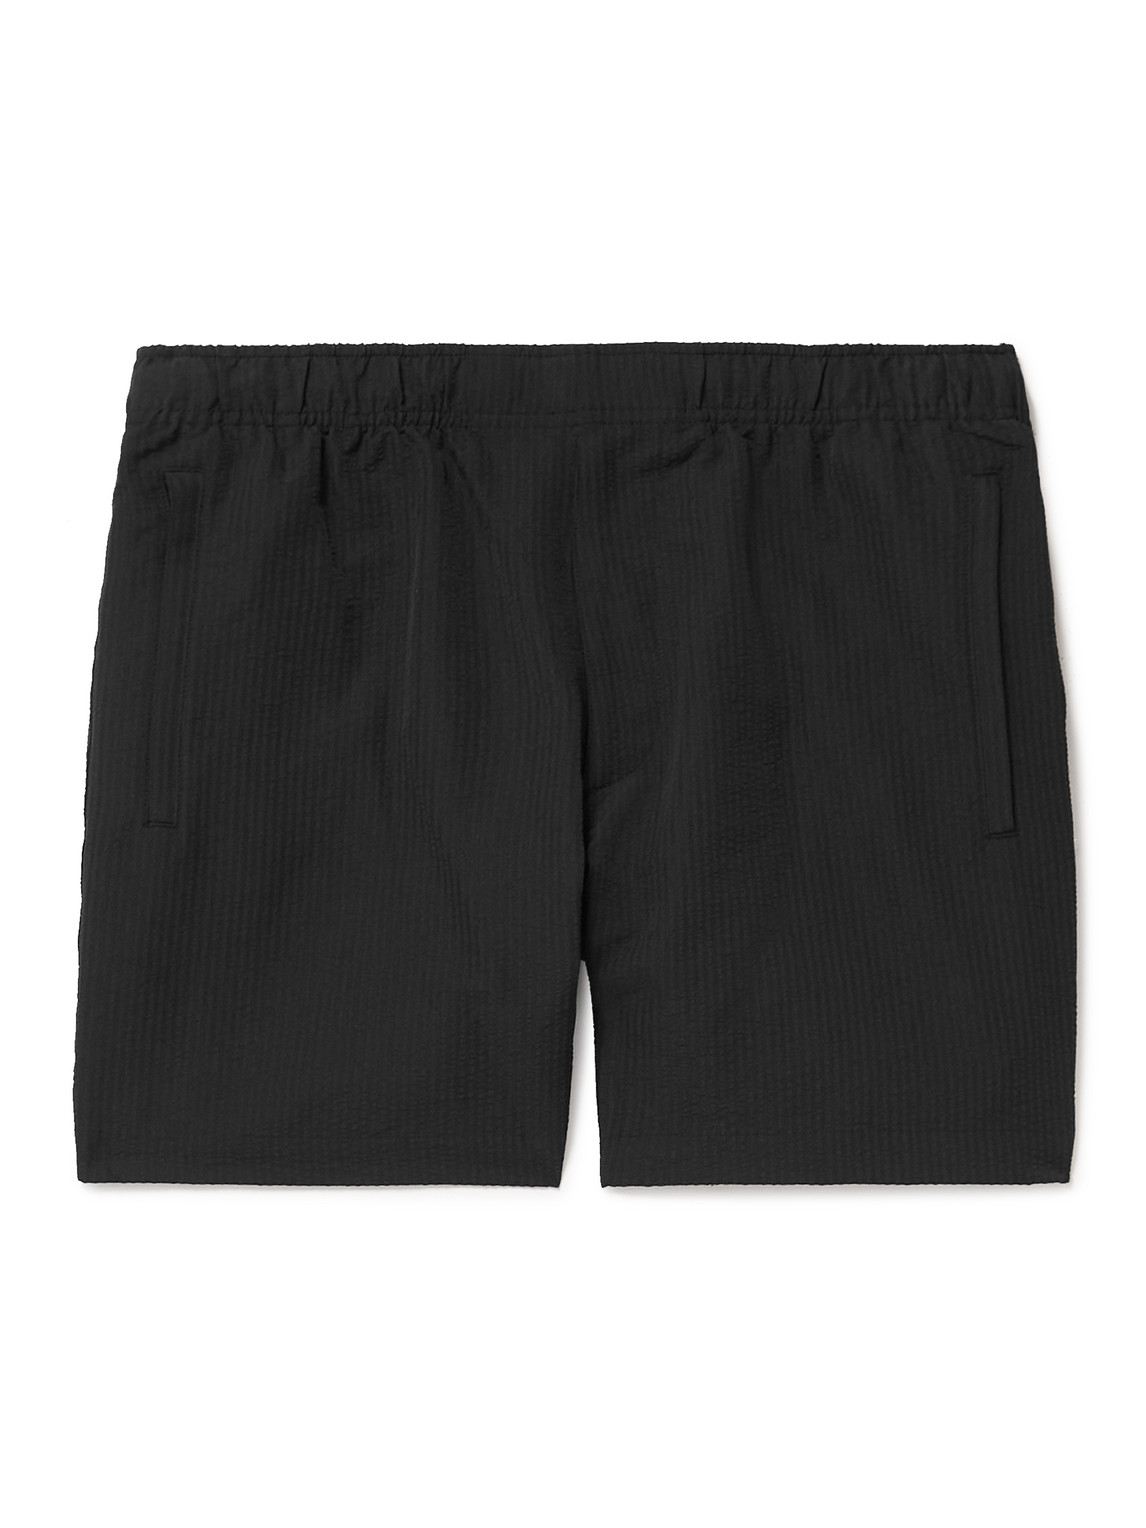 Theory Jace Striped Recycled-Seersucker Swim Shorts